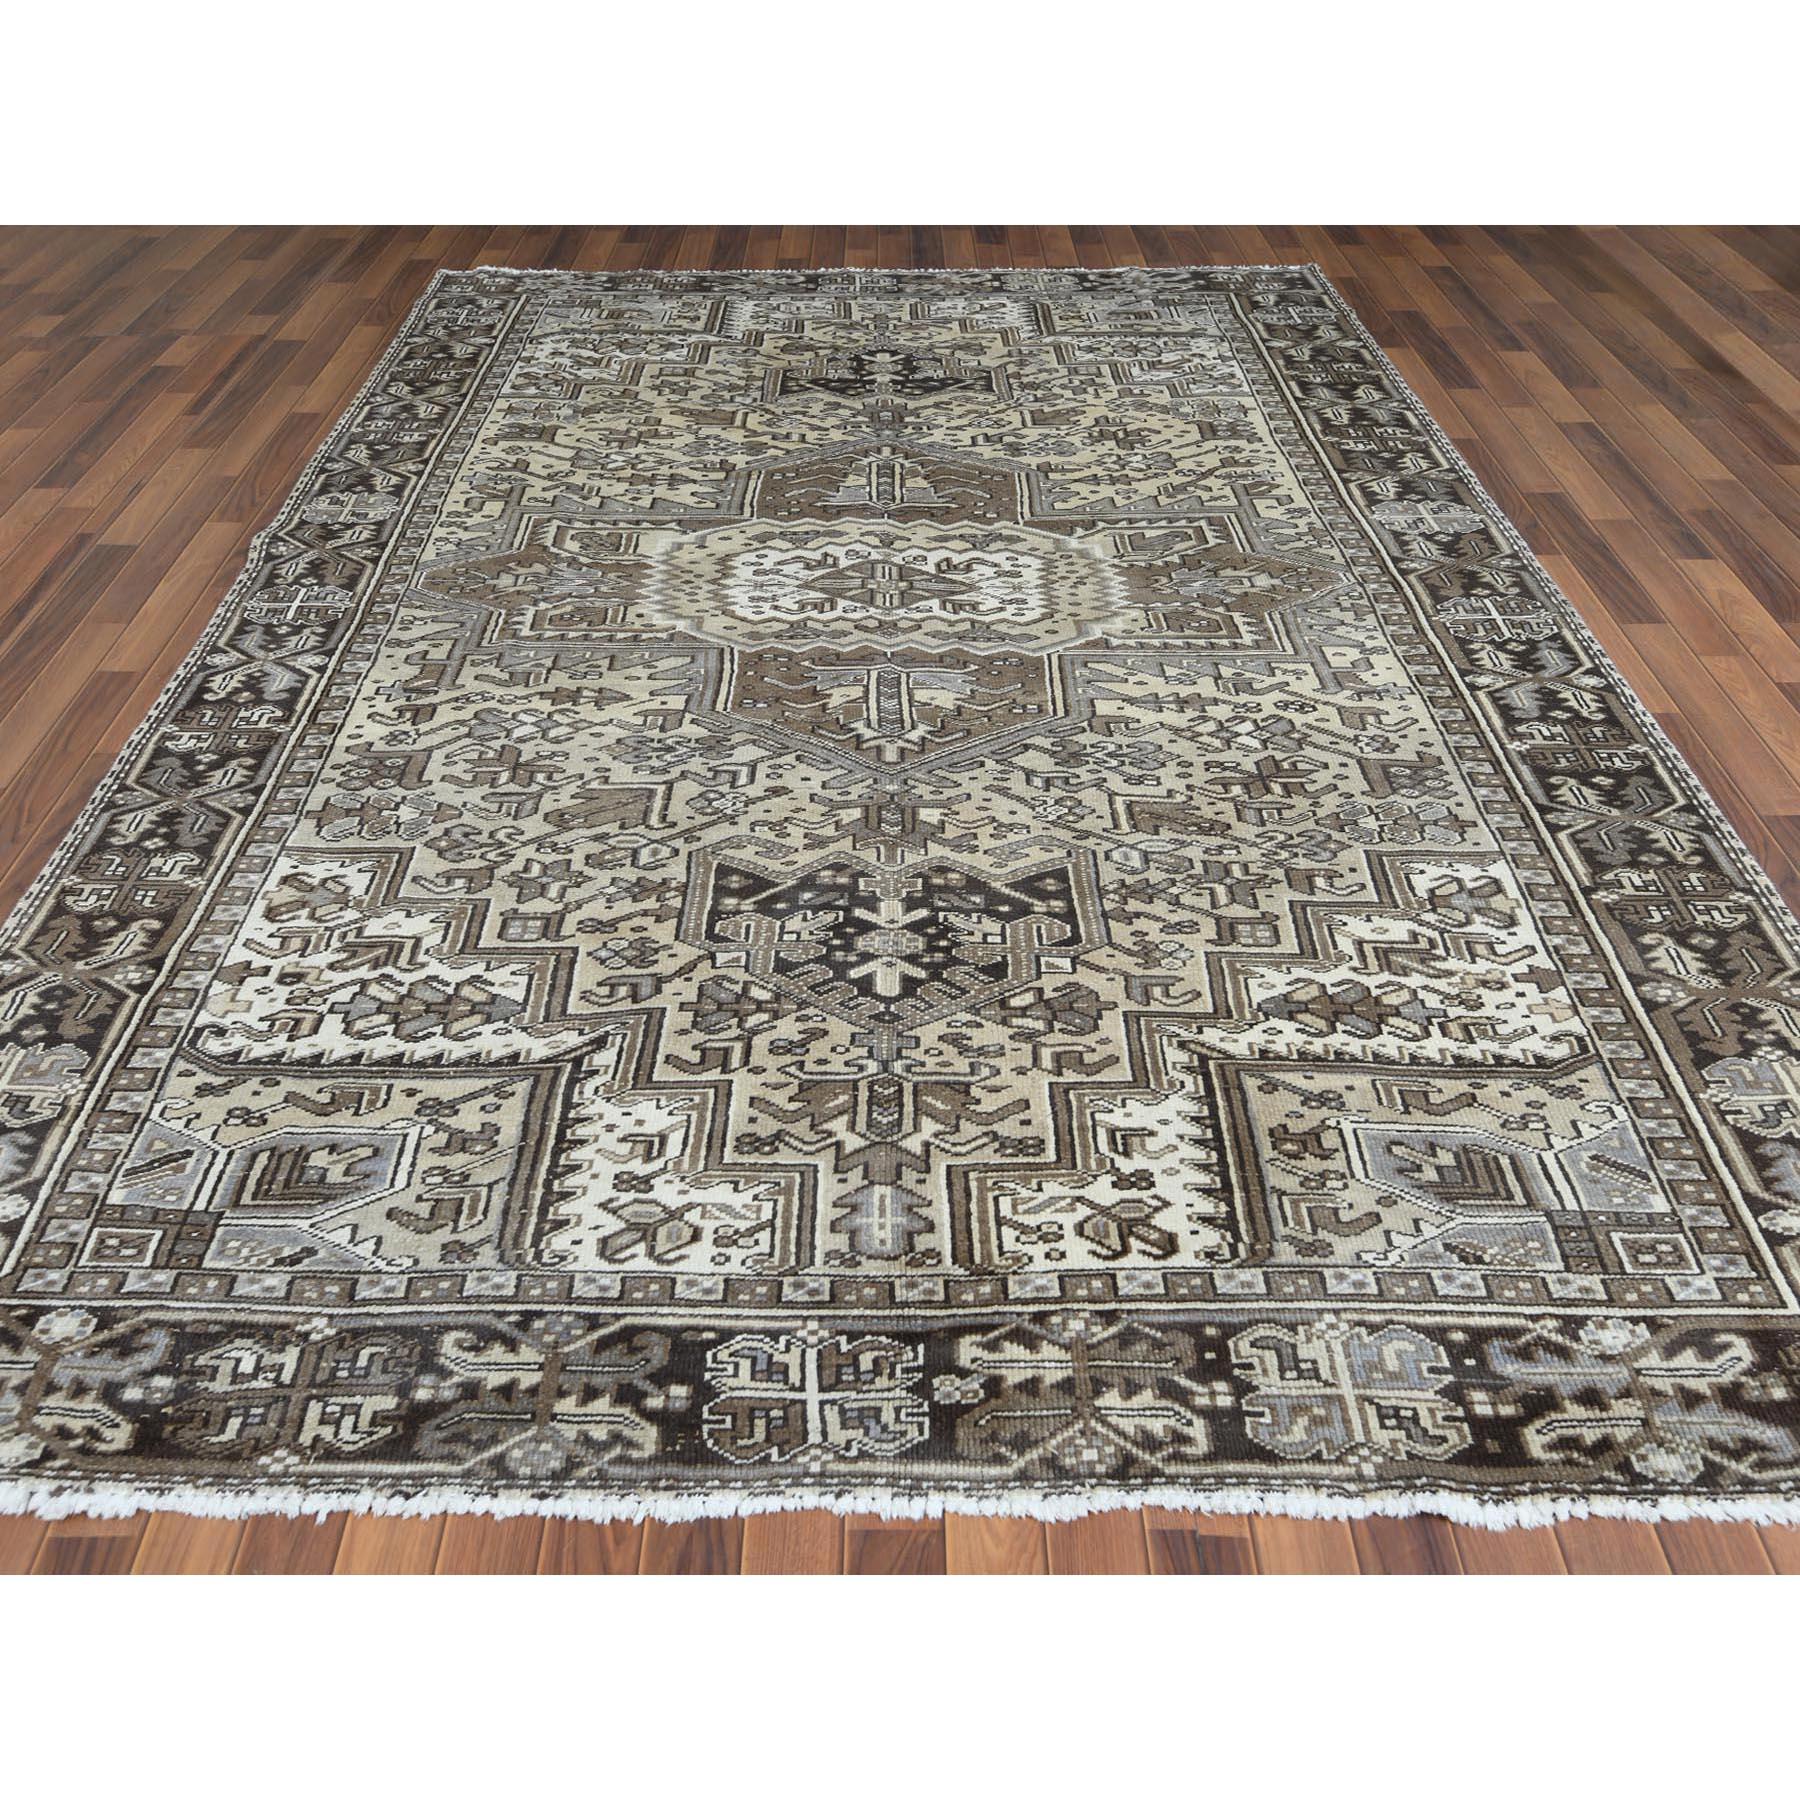 Medieval Semi Antique Washed Out Persian Heriz Pure Wool Handmade Rug